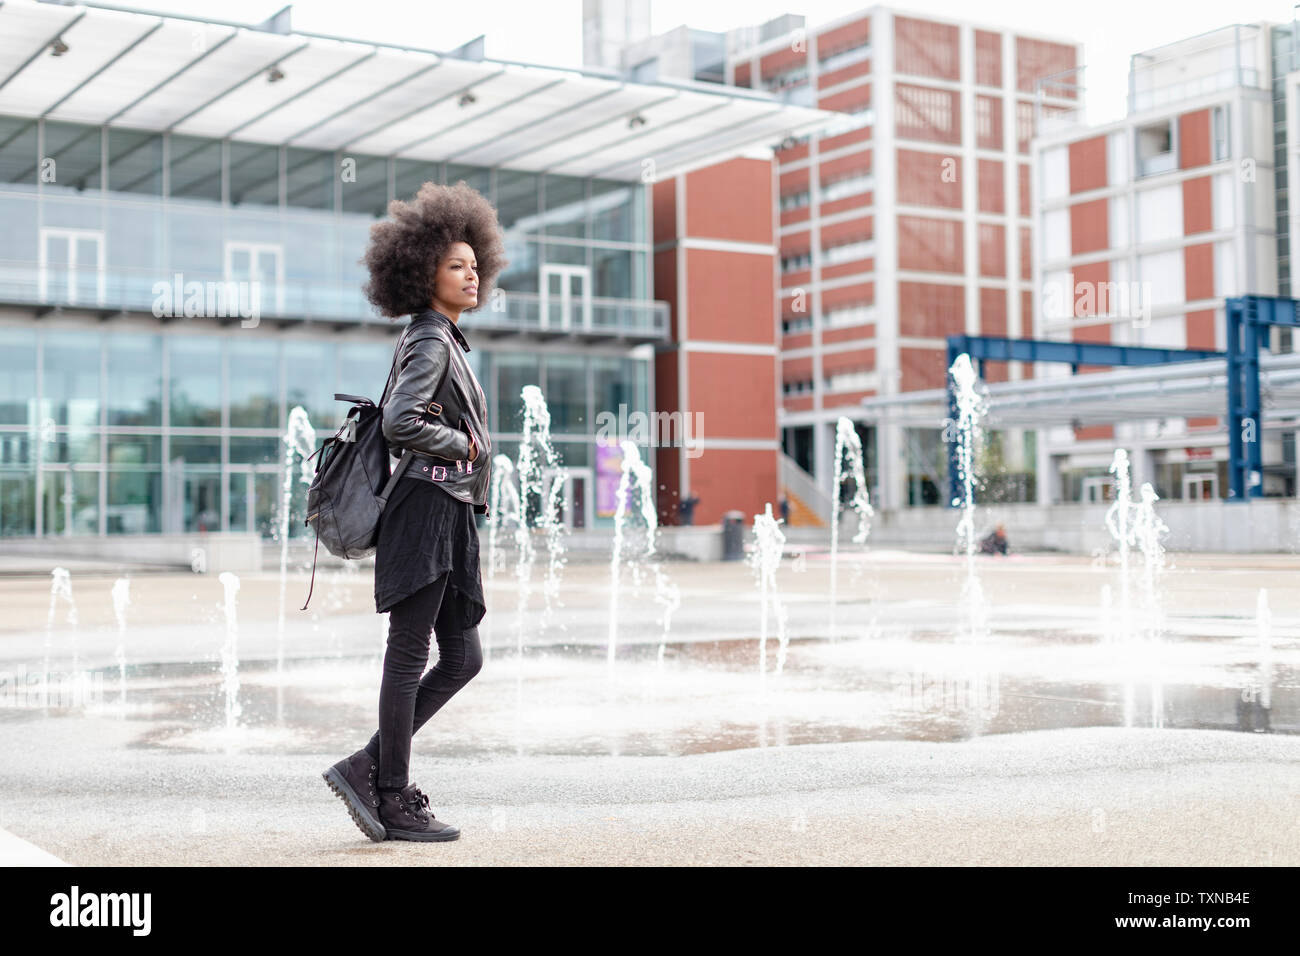 Cool young woman with afro hair on city concourse, full length Stock Photo